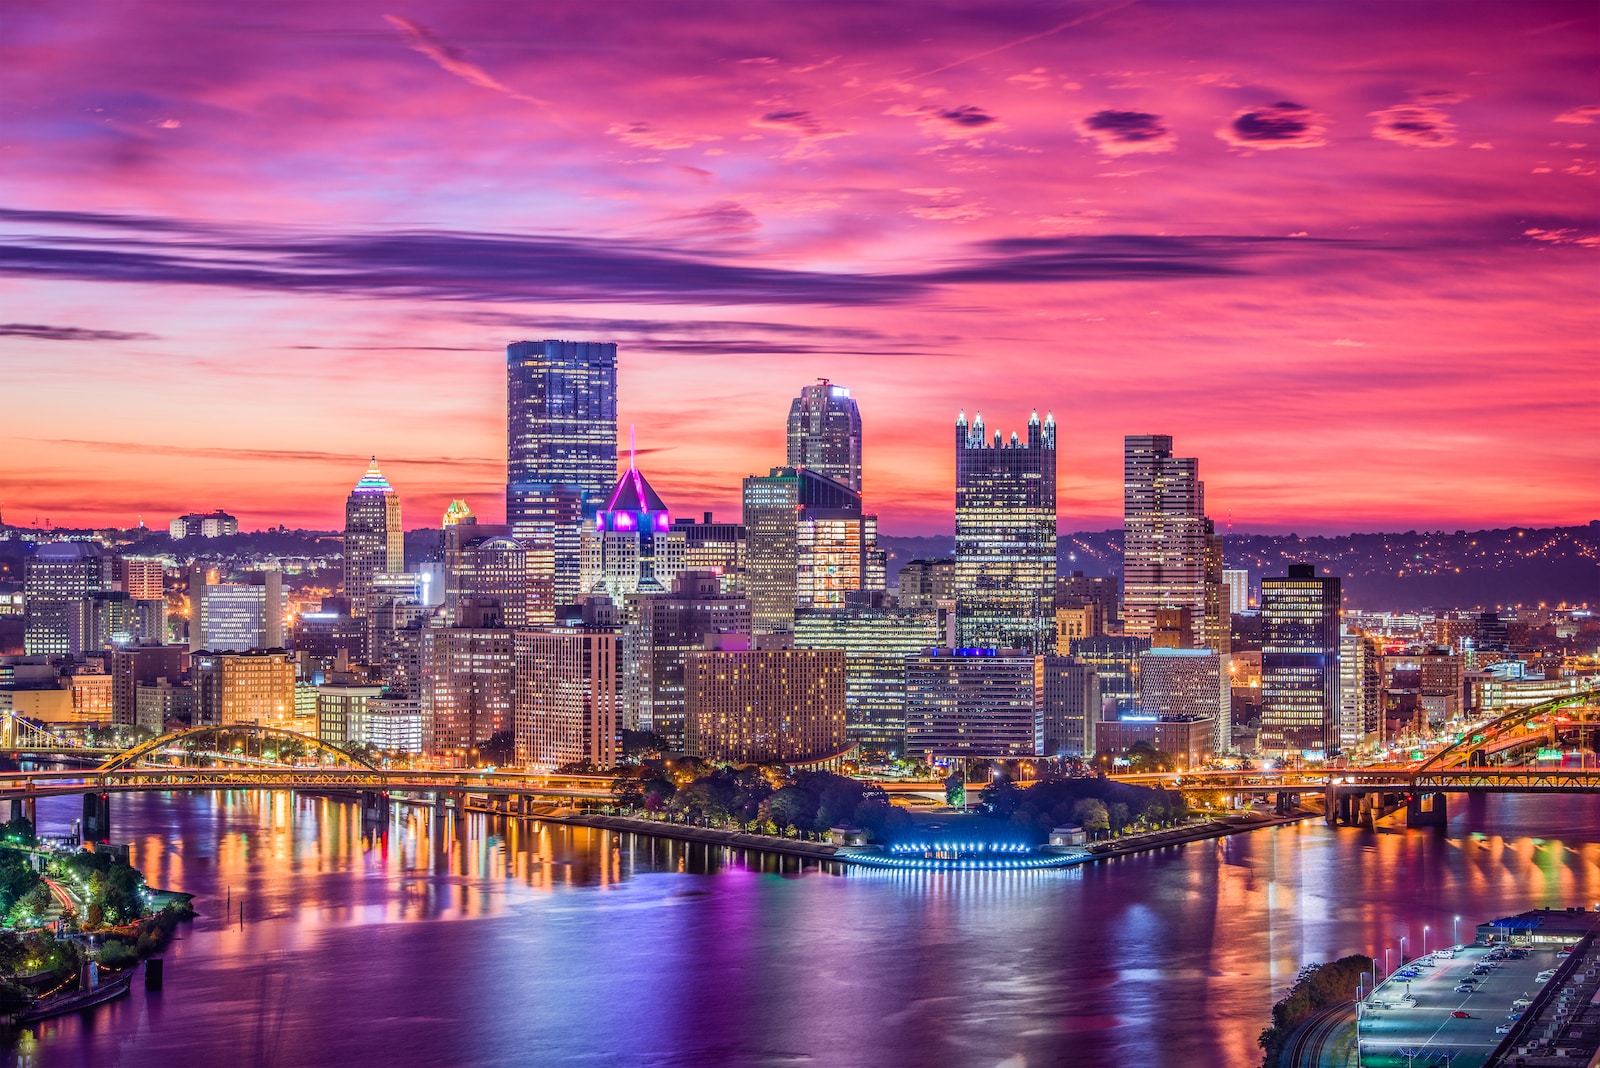 Image Credit: Shutterstock / Sean Pavone <p><span>Pittsburgh is the city of bridges that doesn’t always bridge the gap to welcoming. It’s an industrial powerhouse turning into a tech hub, where old gruffness meets new gruff.</span></p>